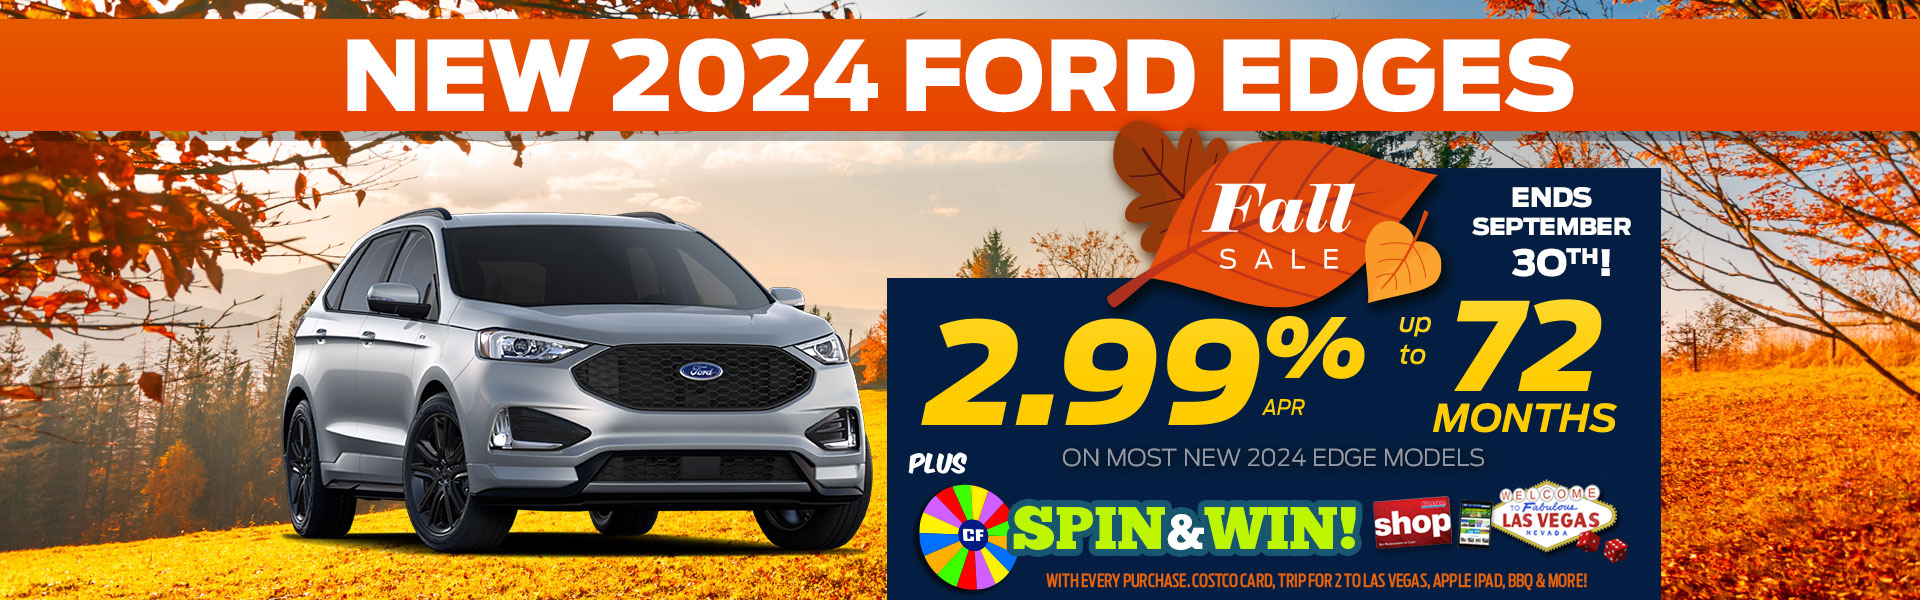 2024 Ford Edge Fall Sales Event